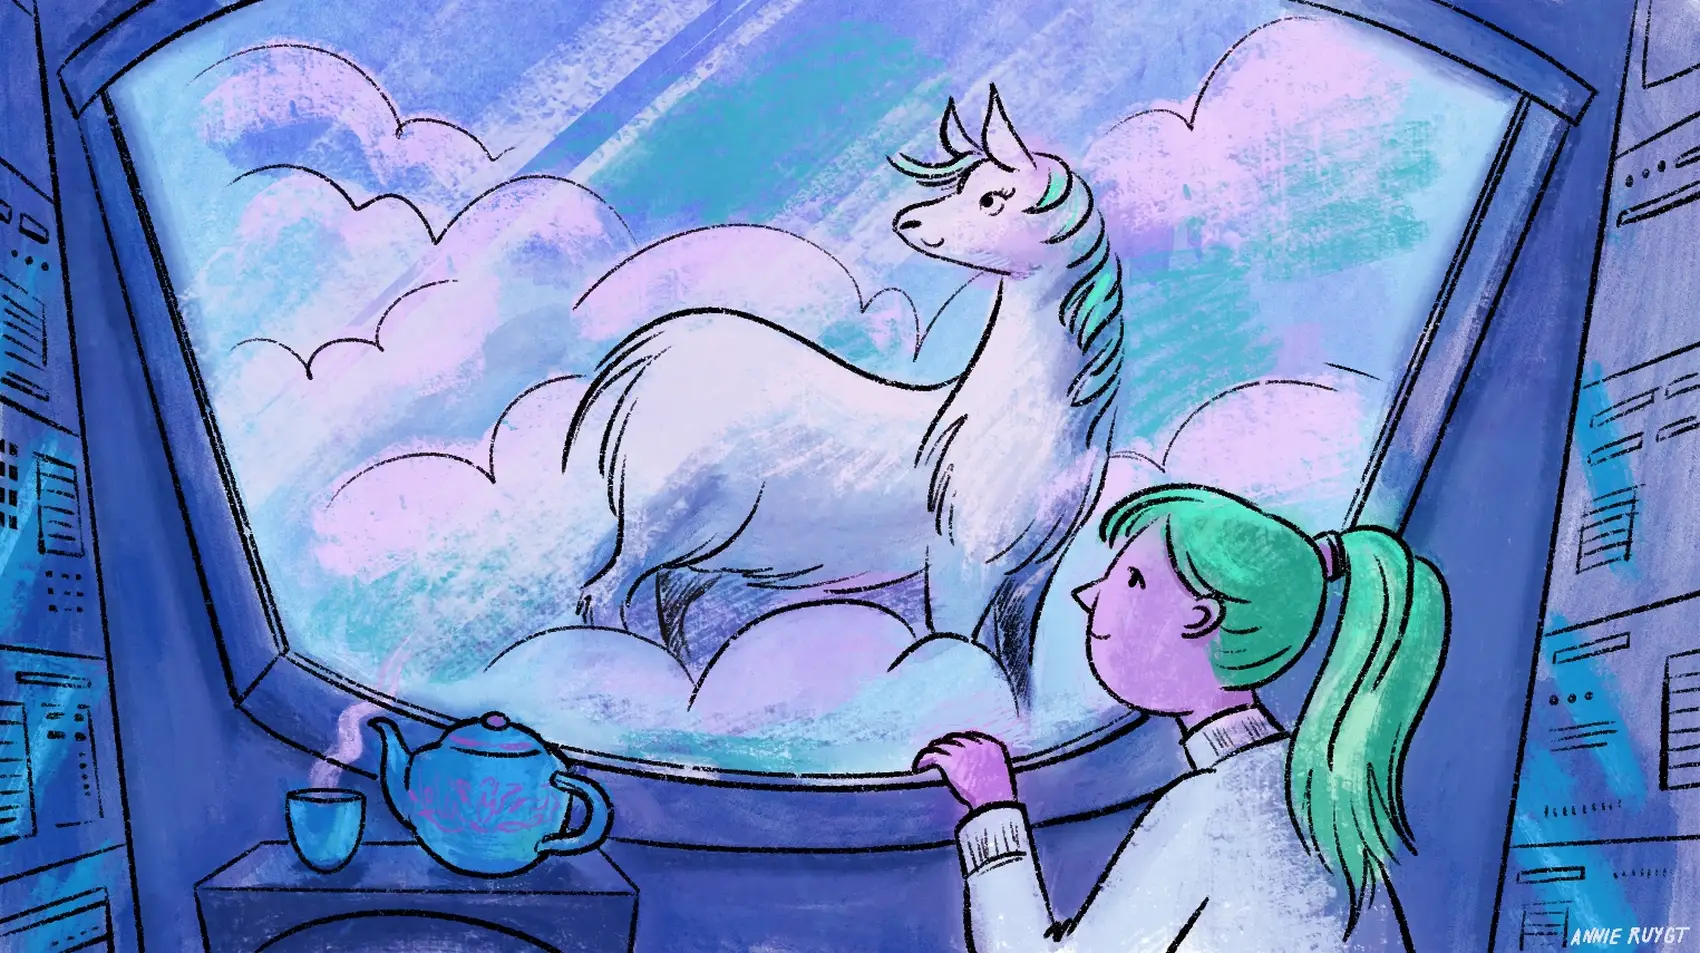 A cartoon illustration of a green haired woman with a ponytail looks into a portal in a datacentre to see a graceful llama.